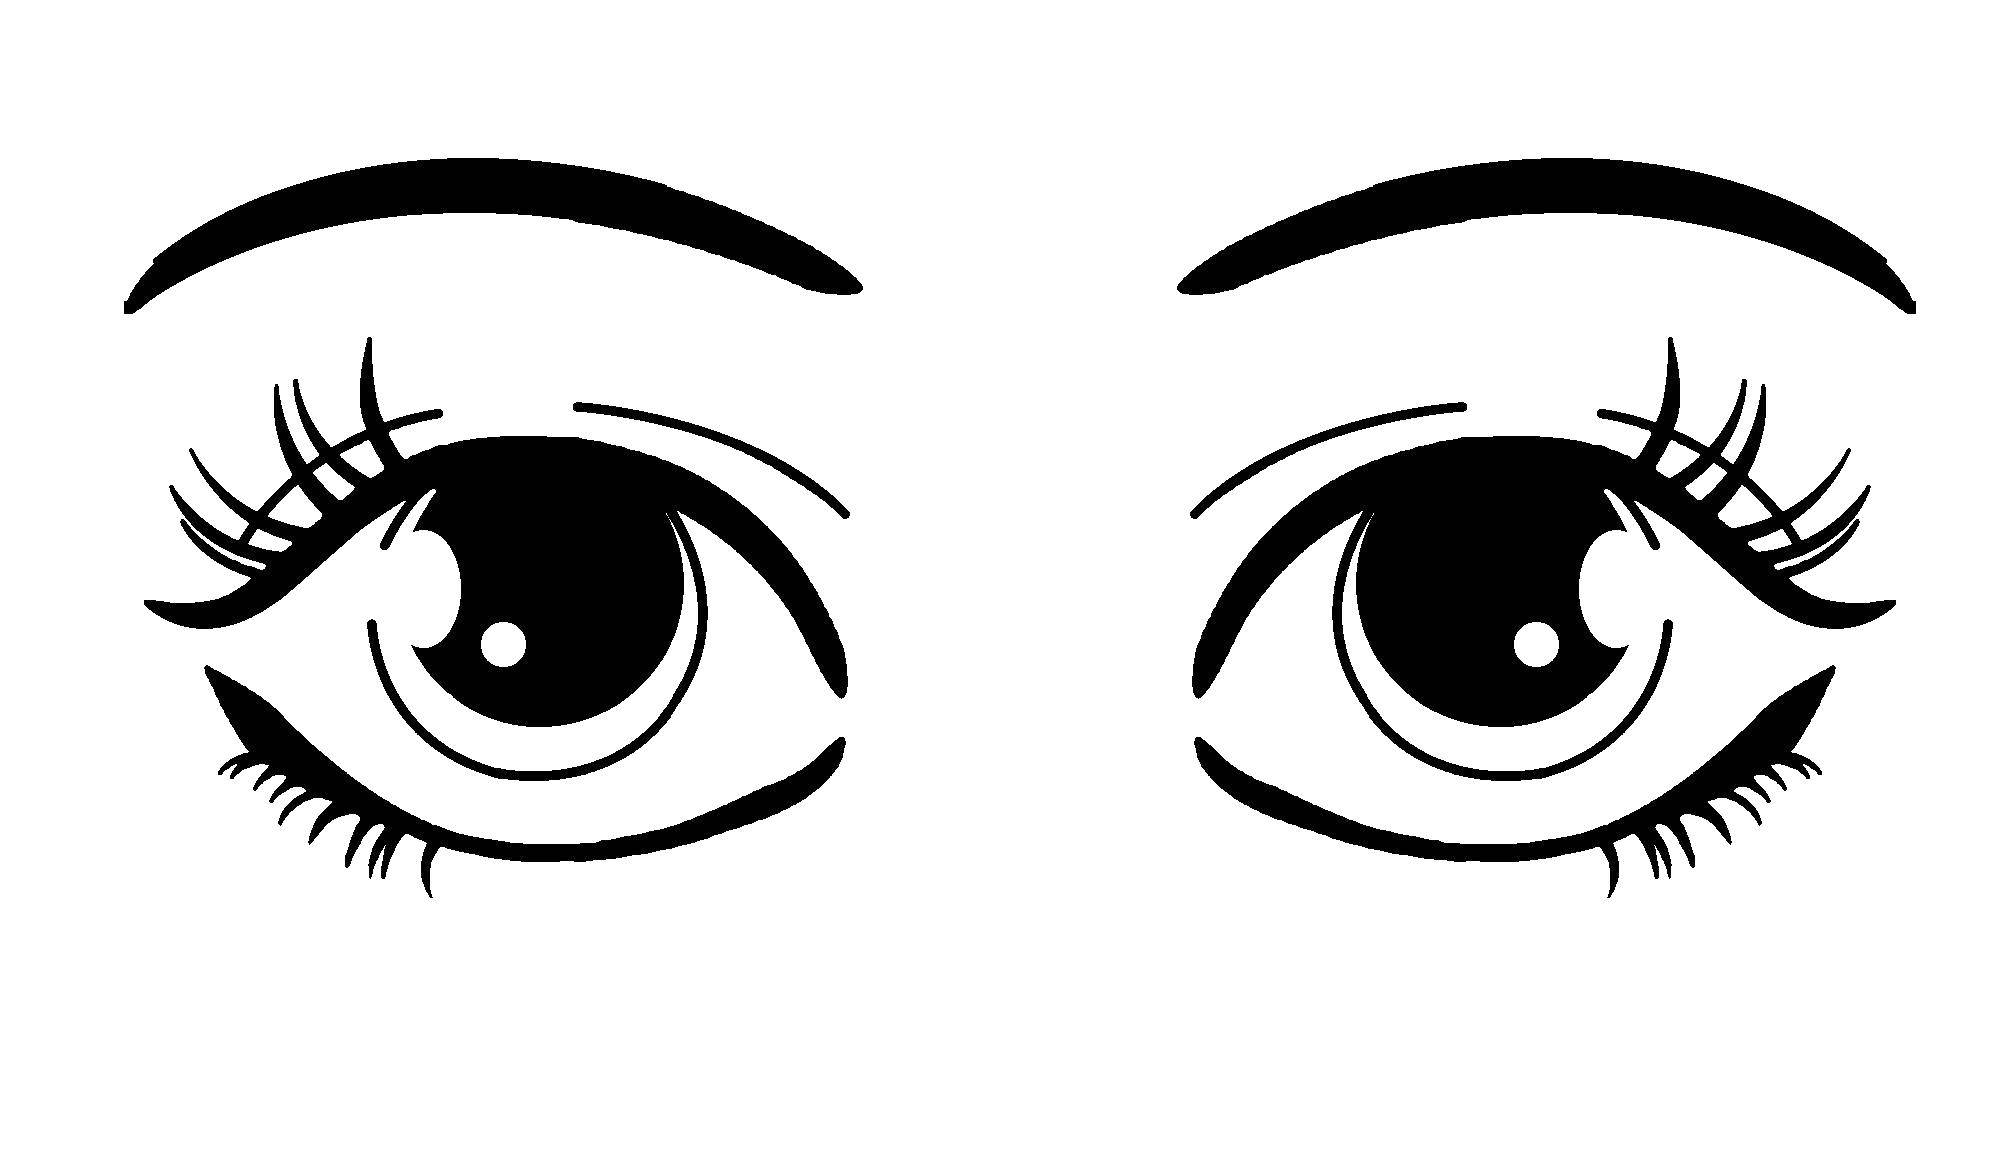 Coloring Eyes. Category the eye contour. Tags:  eyes.